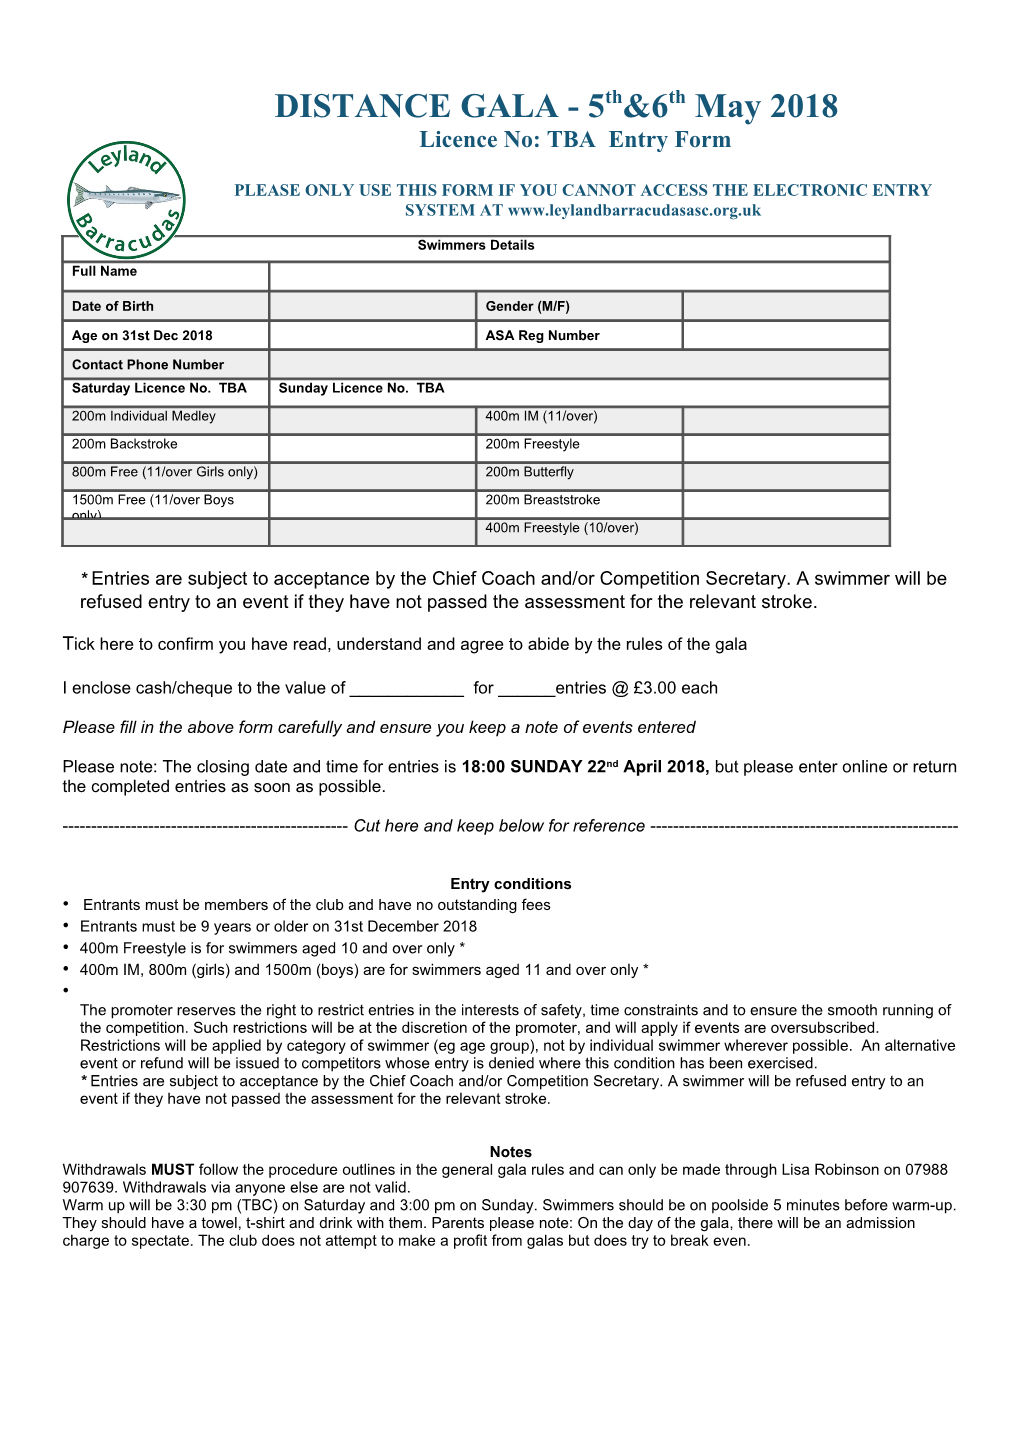 Licence No: TBA Entry Form